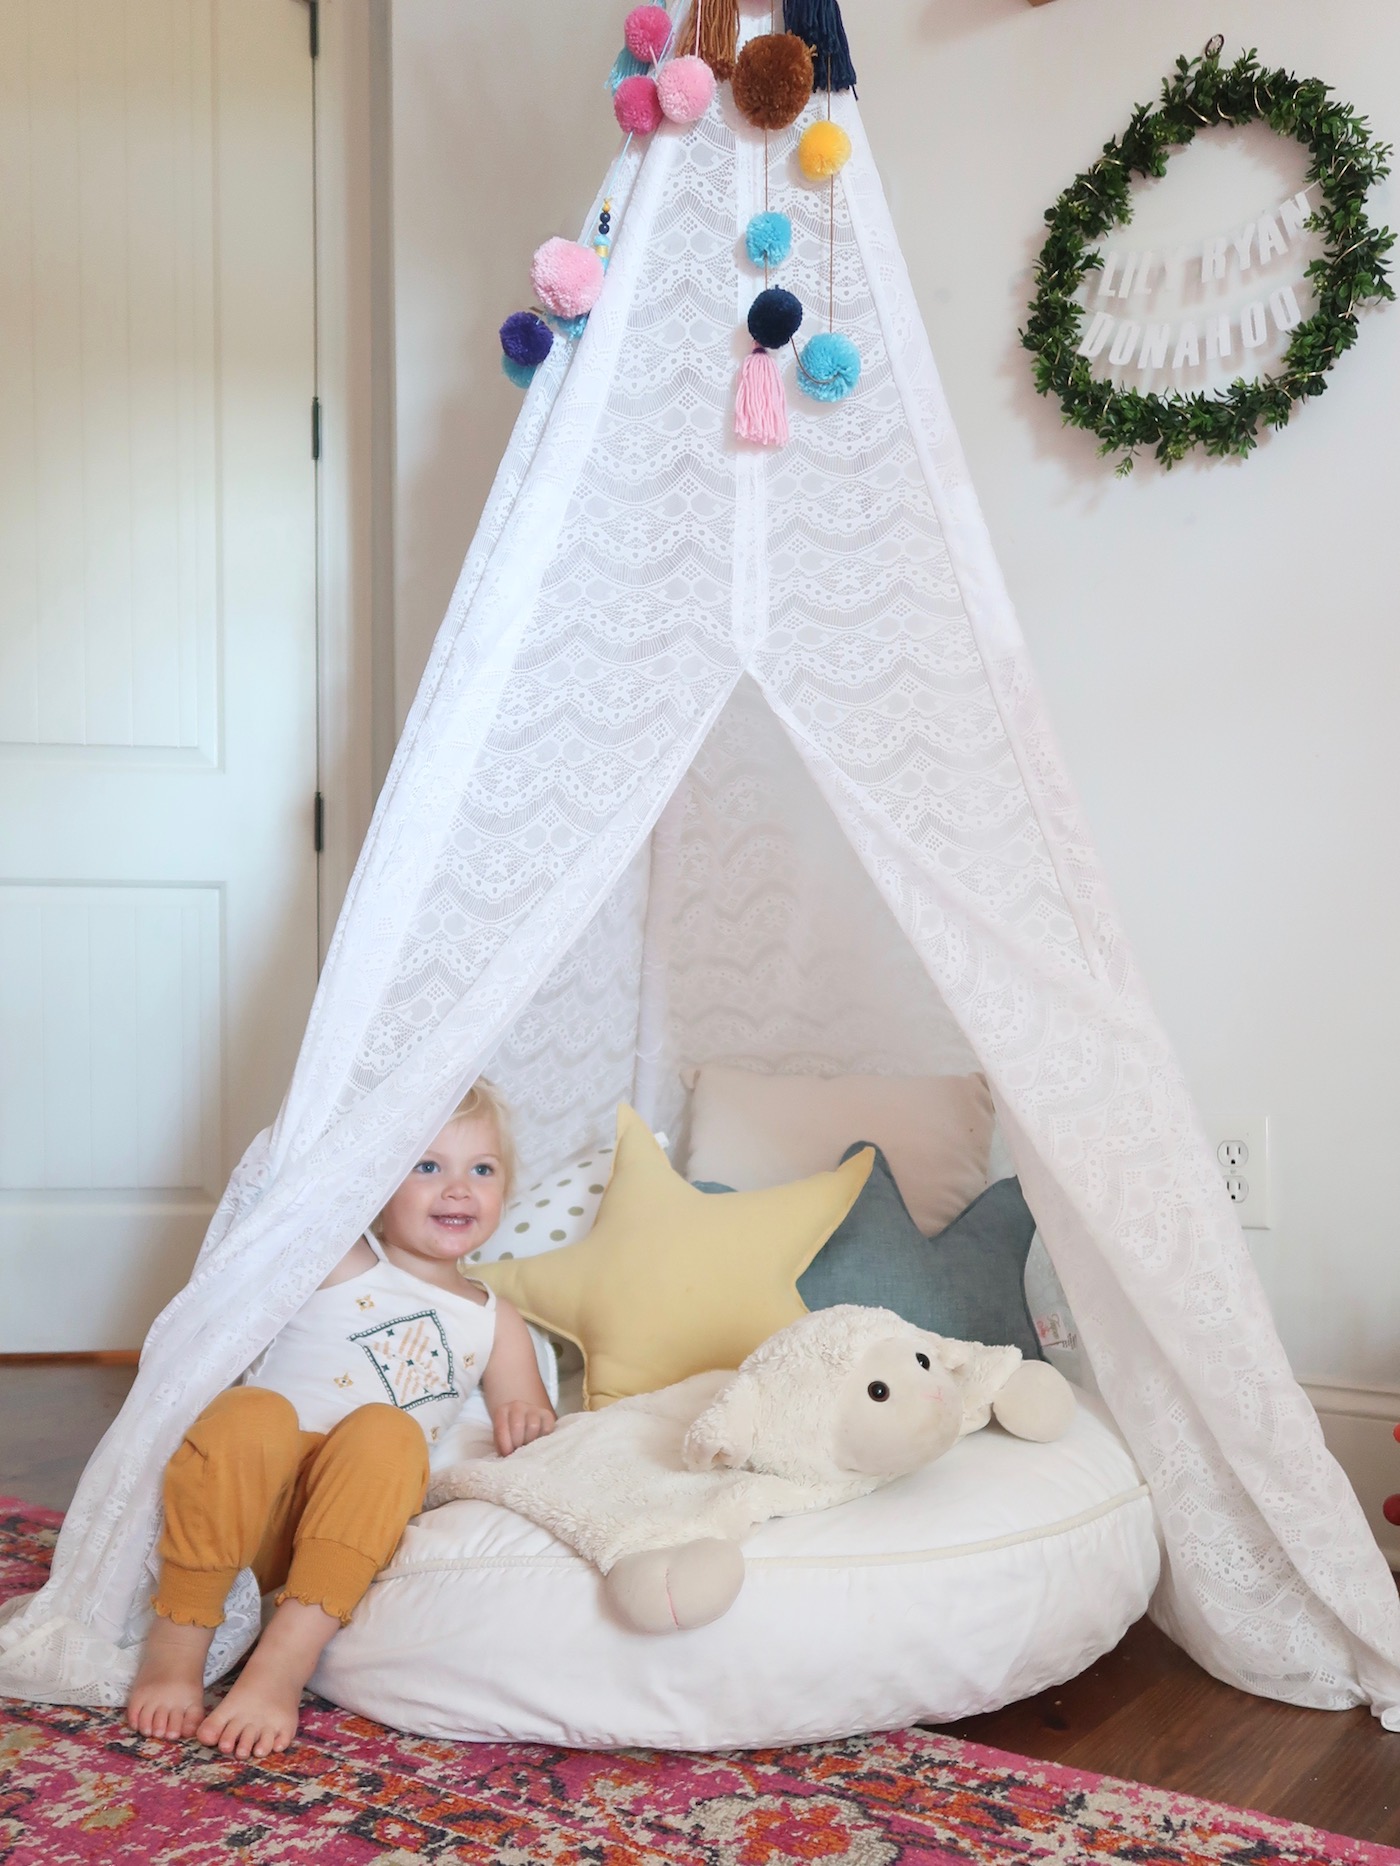 Teepee Joy: Handmade teepees and accessories for boys and girls // www.thehiveblog.com